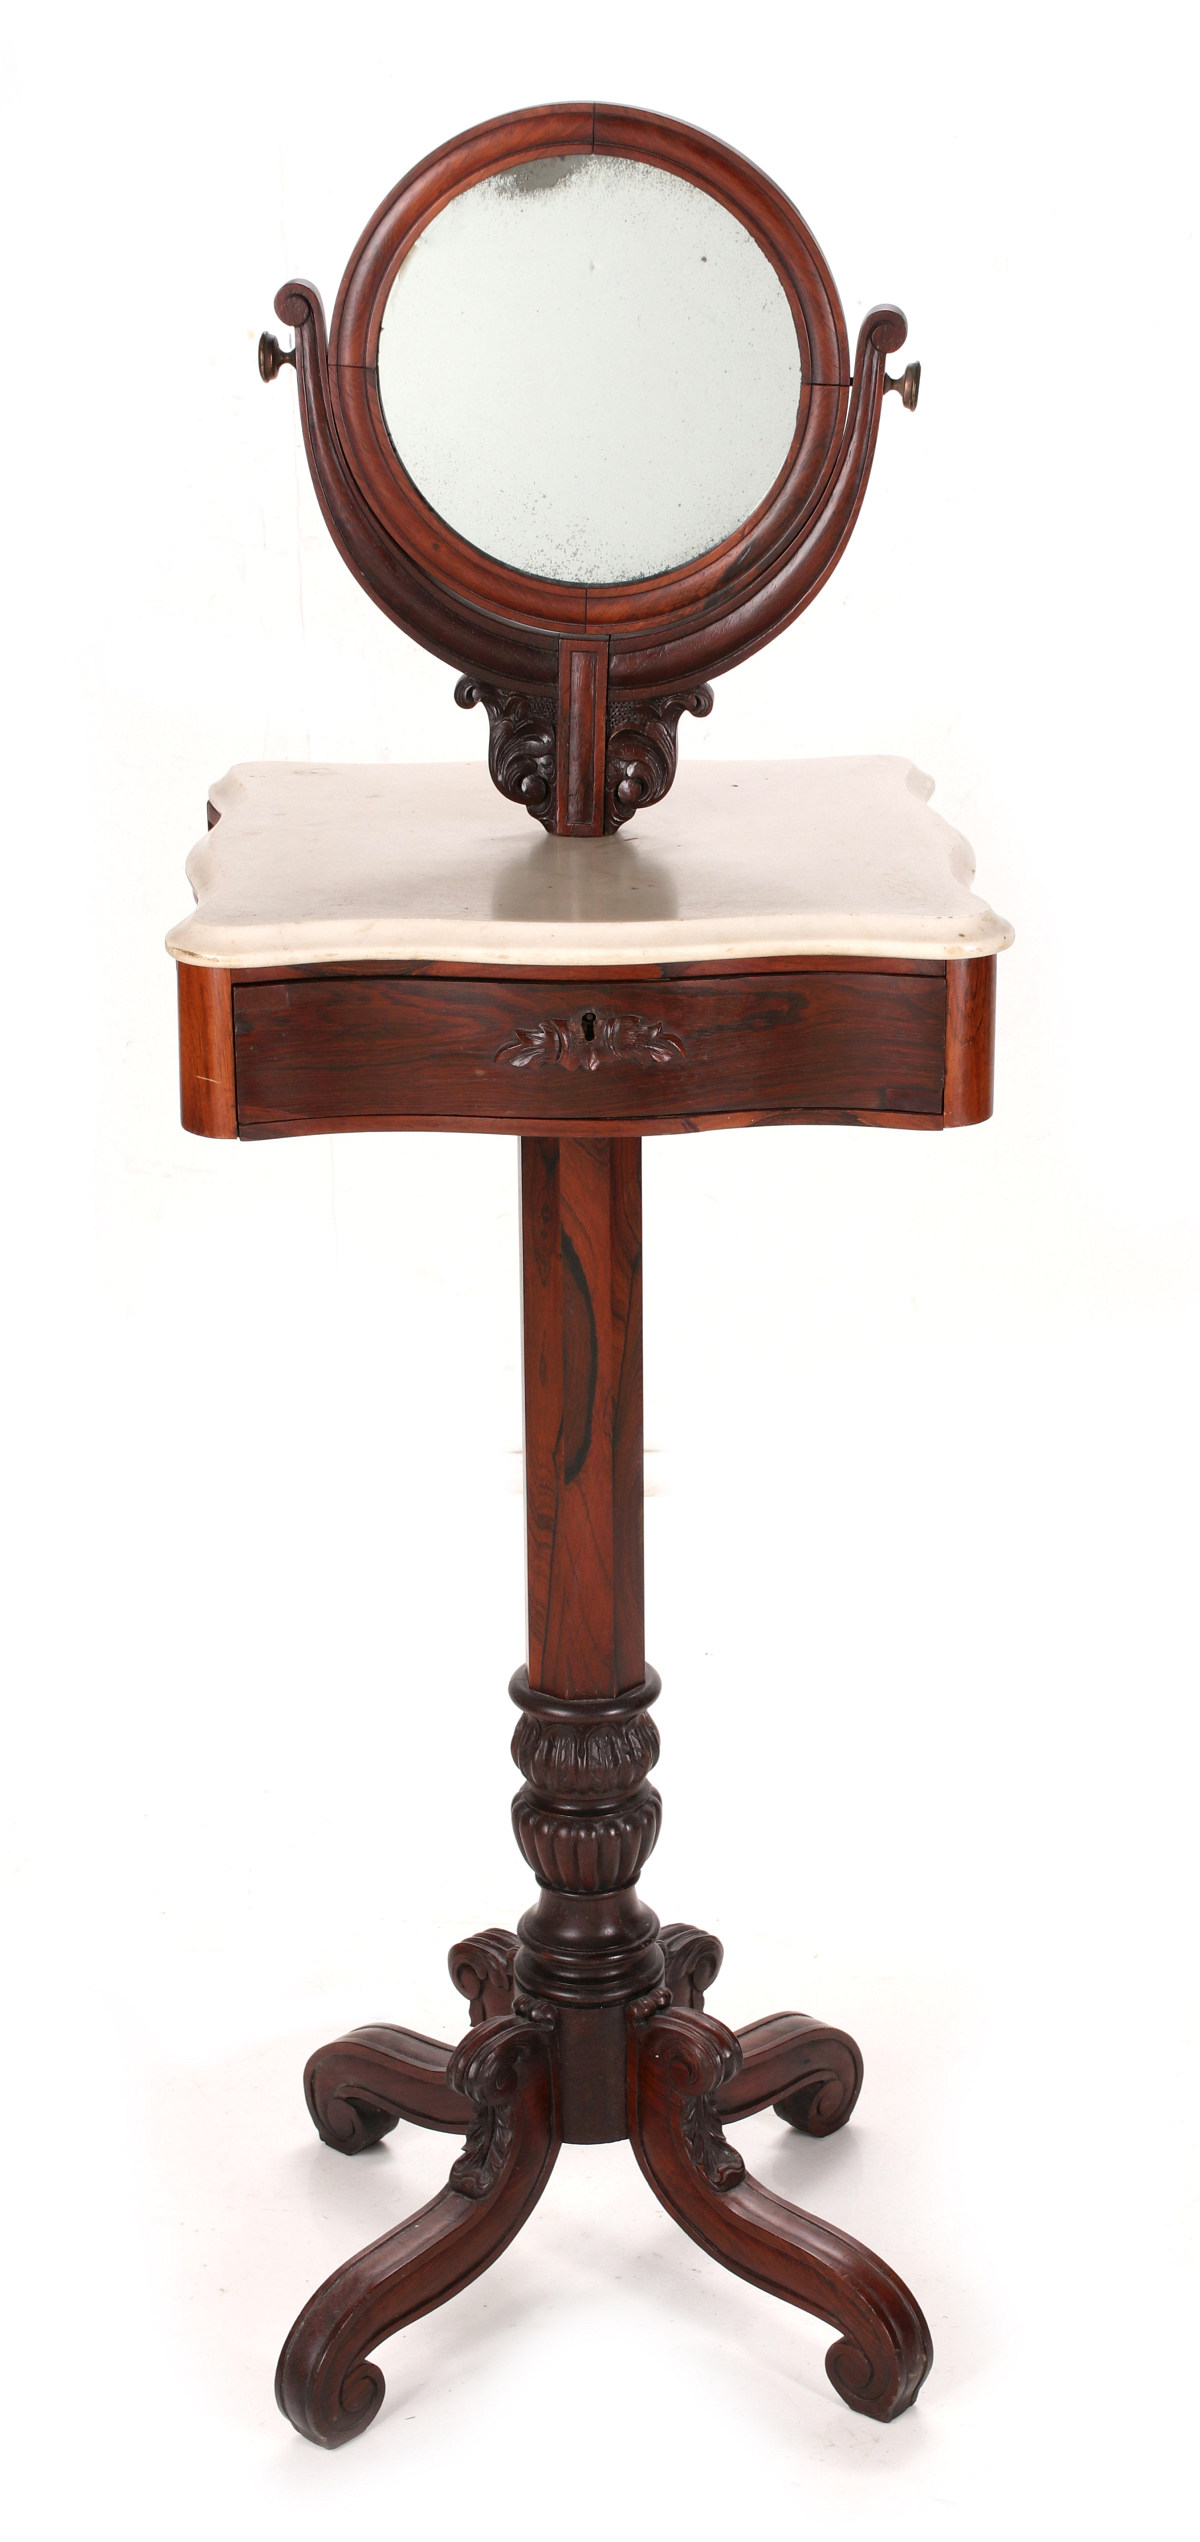 A FINE 19TH CENT VICTORIAN ROSEWOOD SHAVING STAND